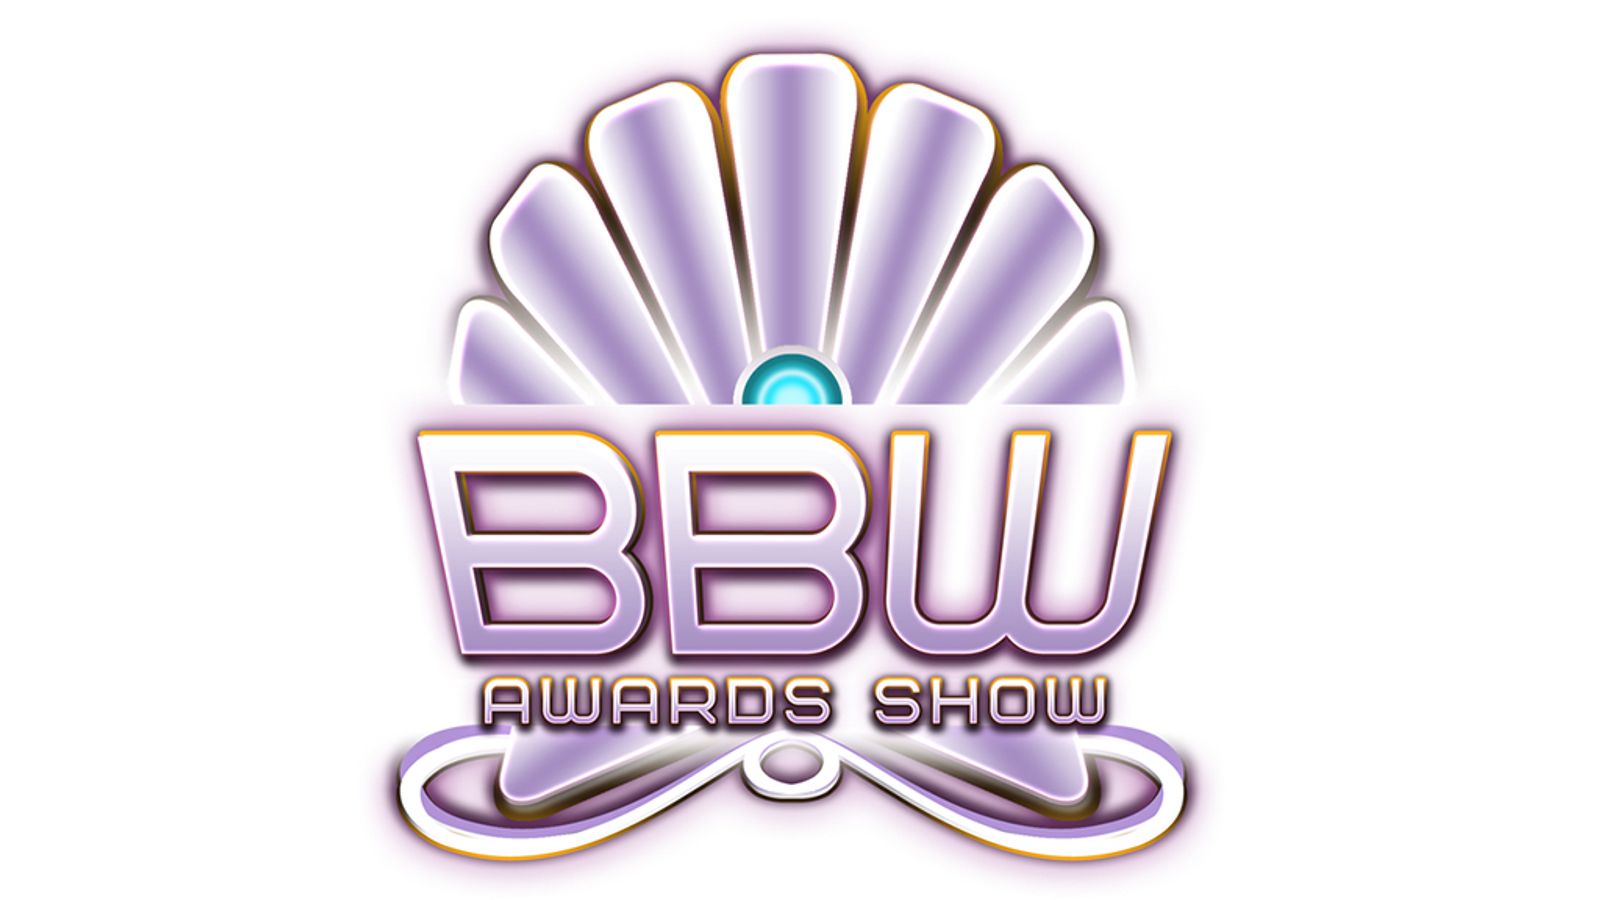 Nominations for 2019 BBW Awards Are Now Being Accepted